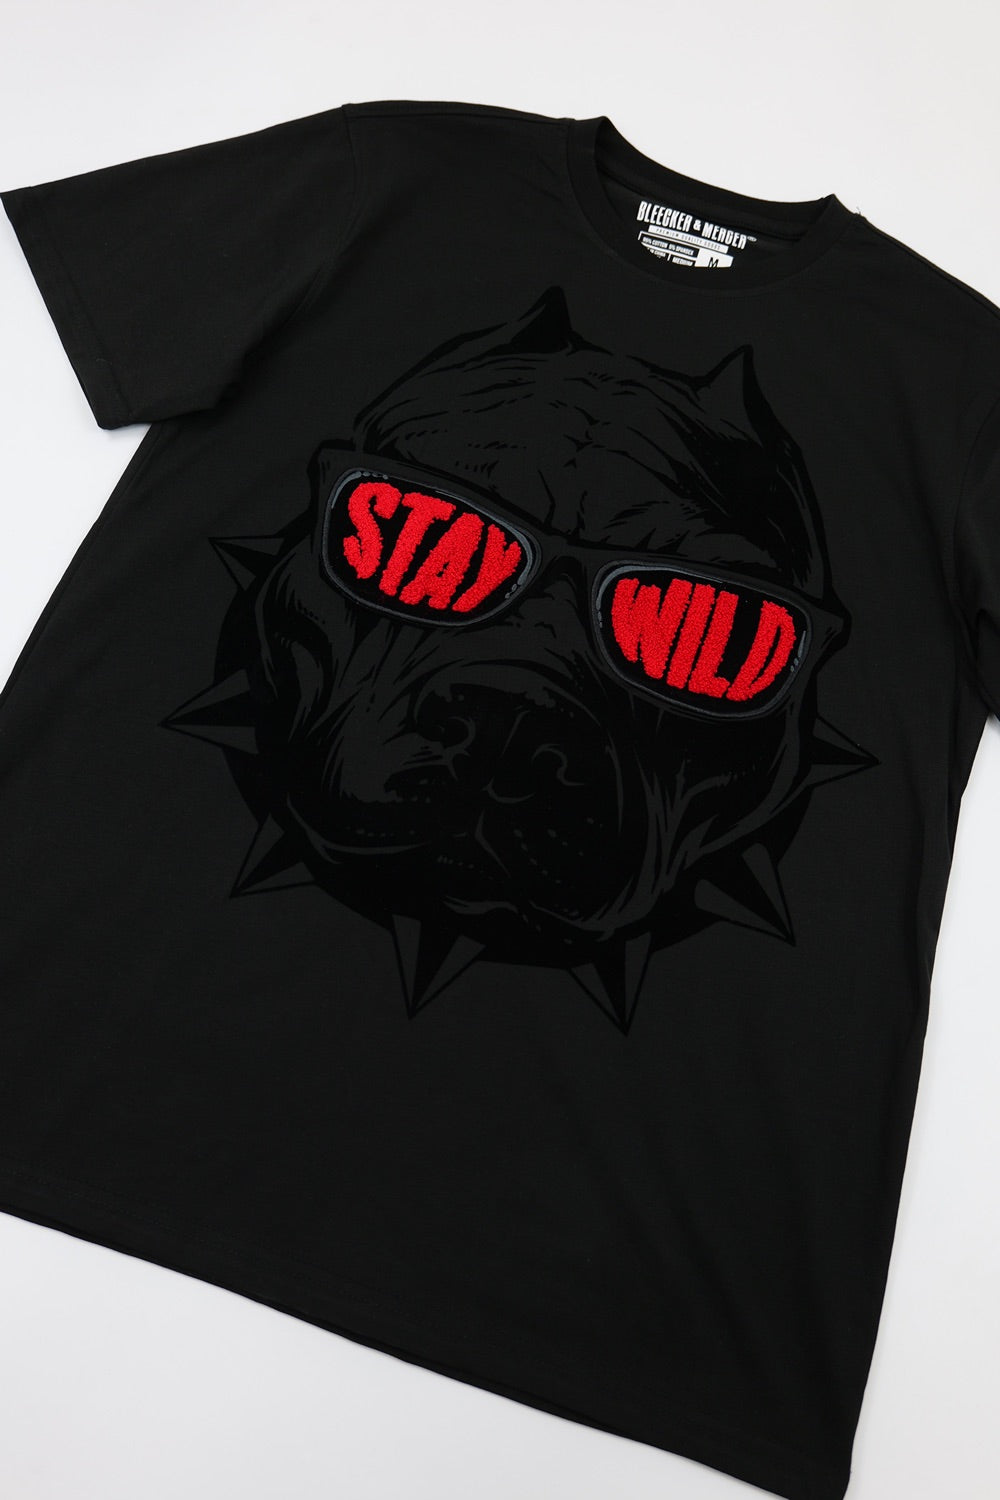 Graphic Tees - Stay Wild T - Shirts